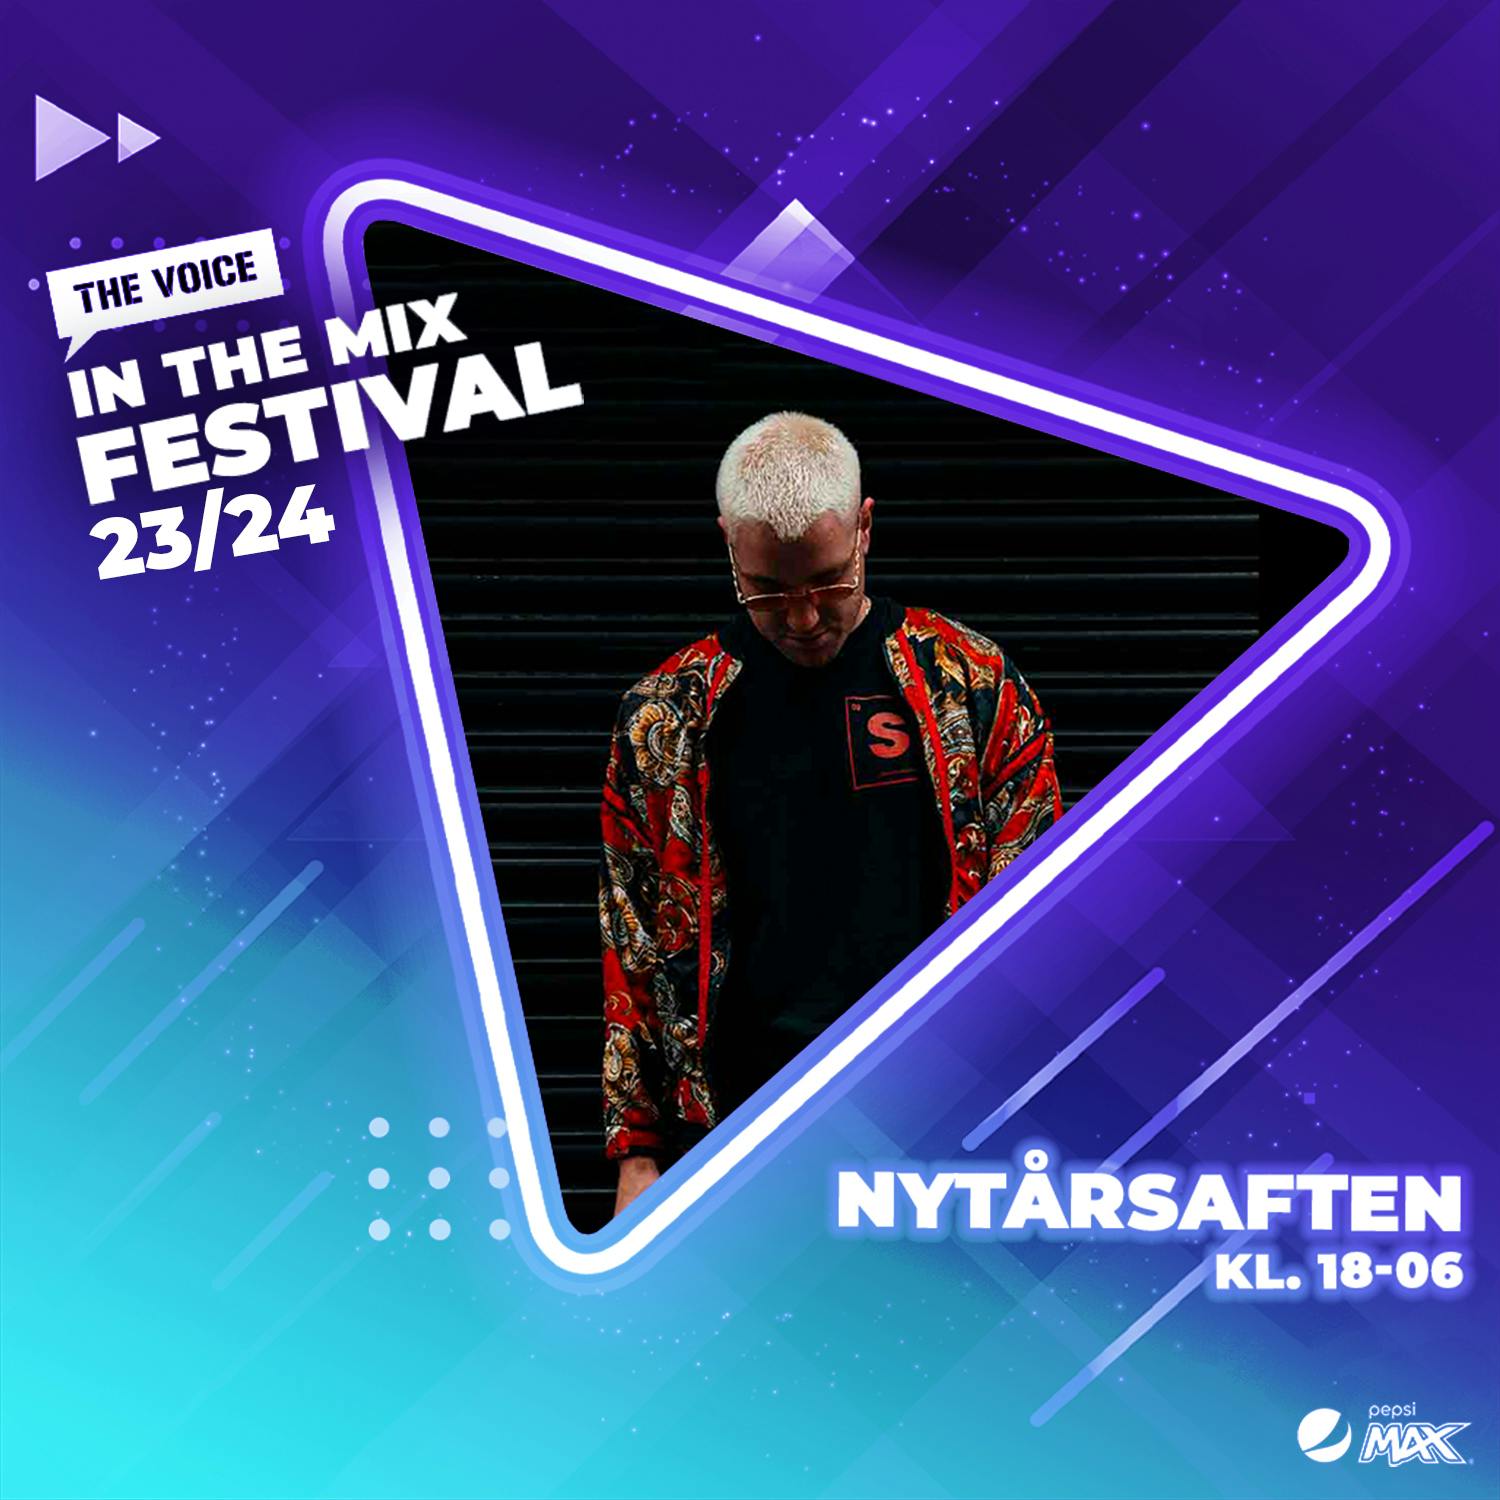 James Hype  - The Voice In The Mix Festival 23/24